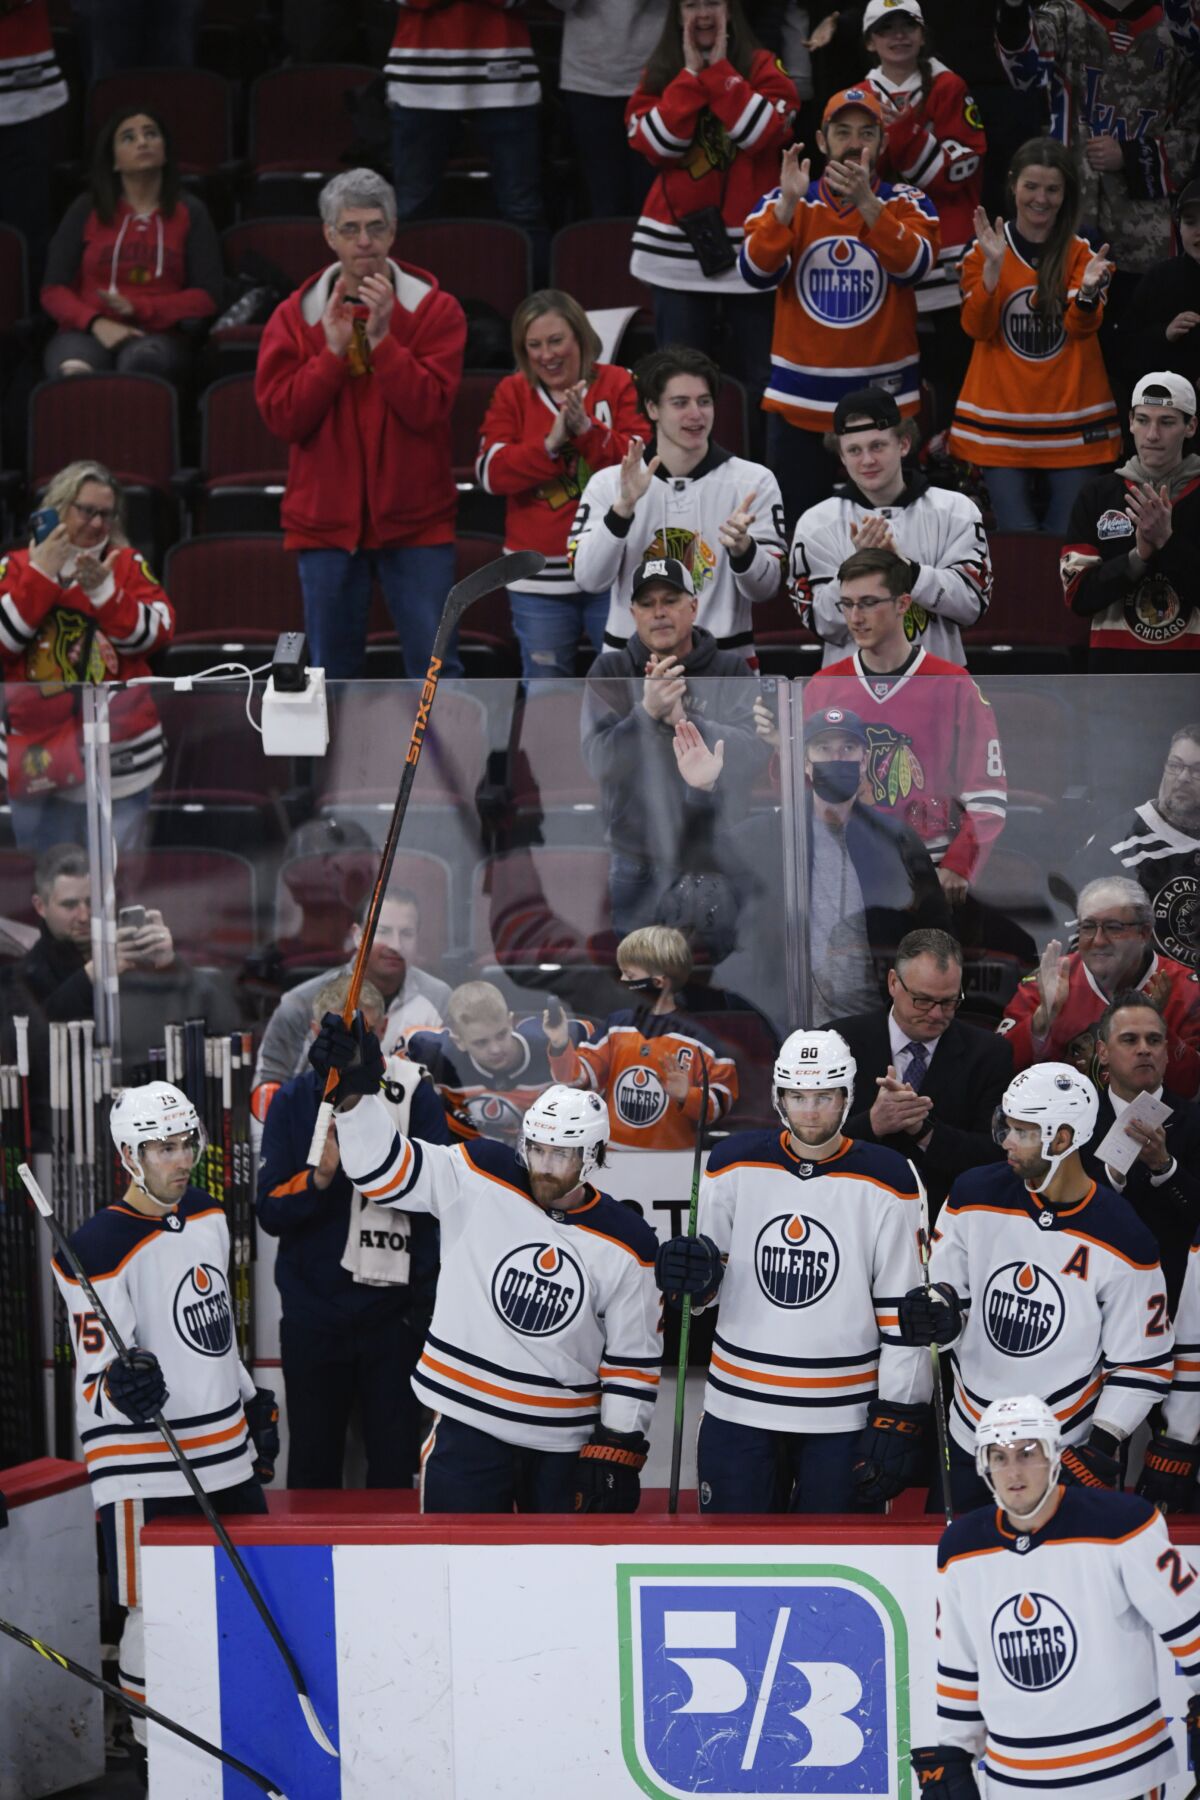 Edmonton Oilers' Duncan Keith, a former Chicago Blackhawk, is honored during an NHL hockey game between the teams Thursday, March 3, 2022, in Chicago. (AP Photo/Paul Beaty)